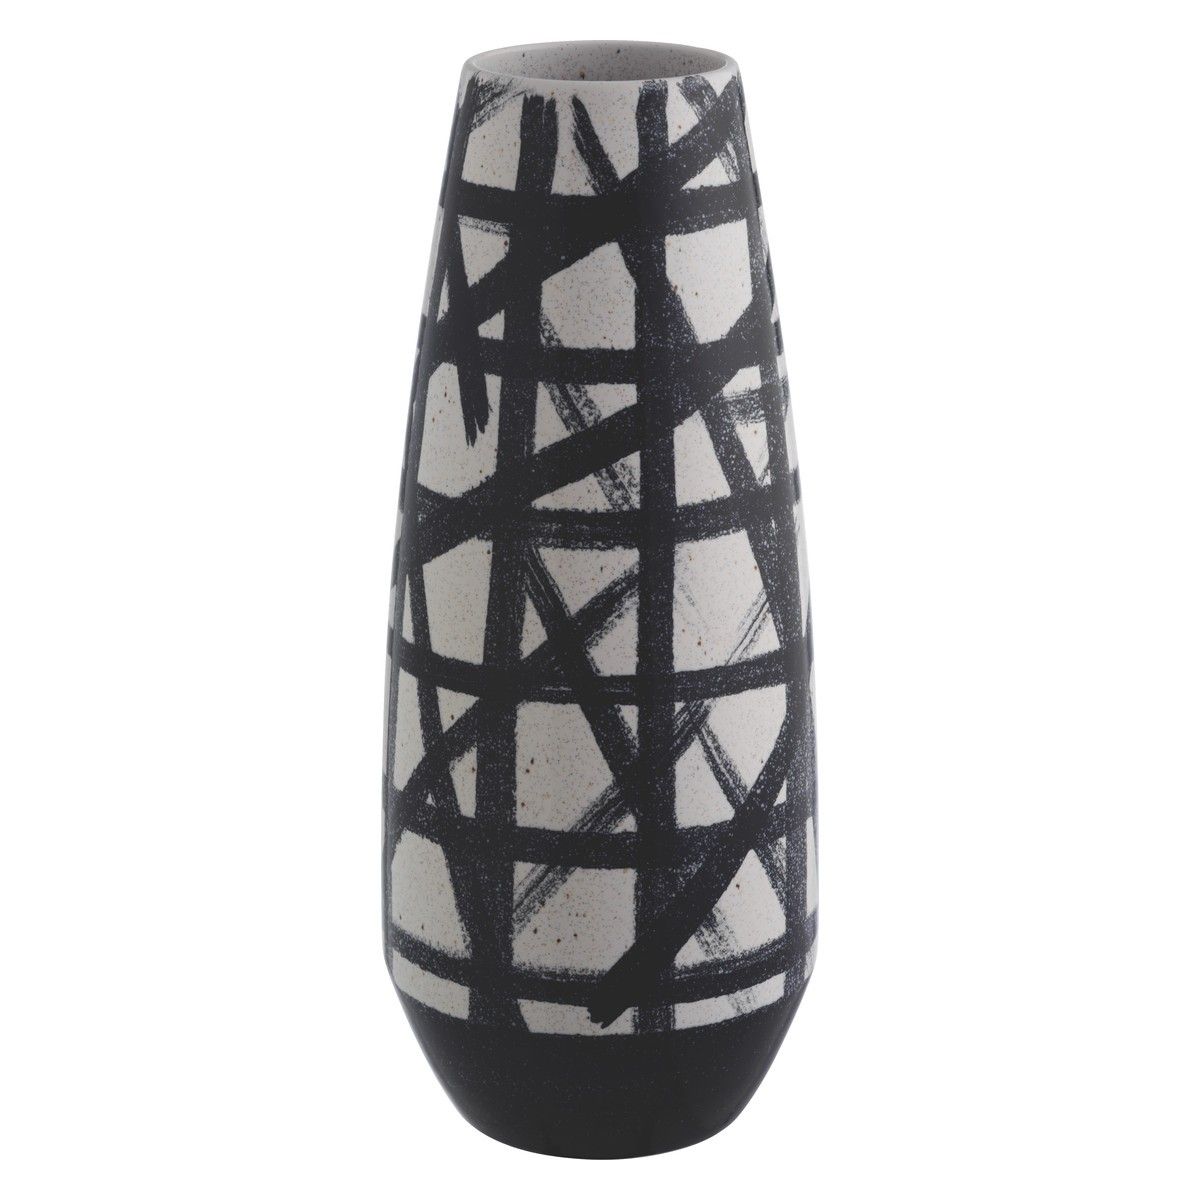 Zuo Croma Small Vase in Black and White 